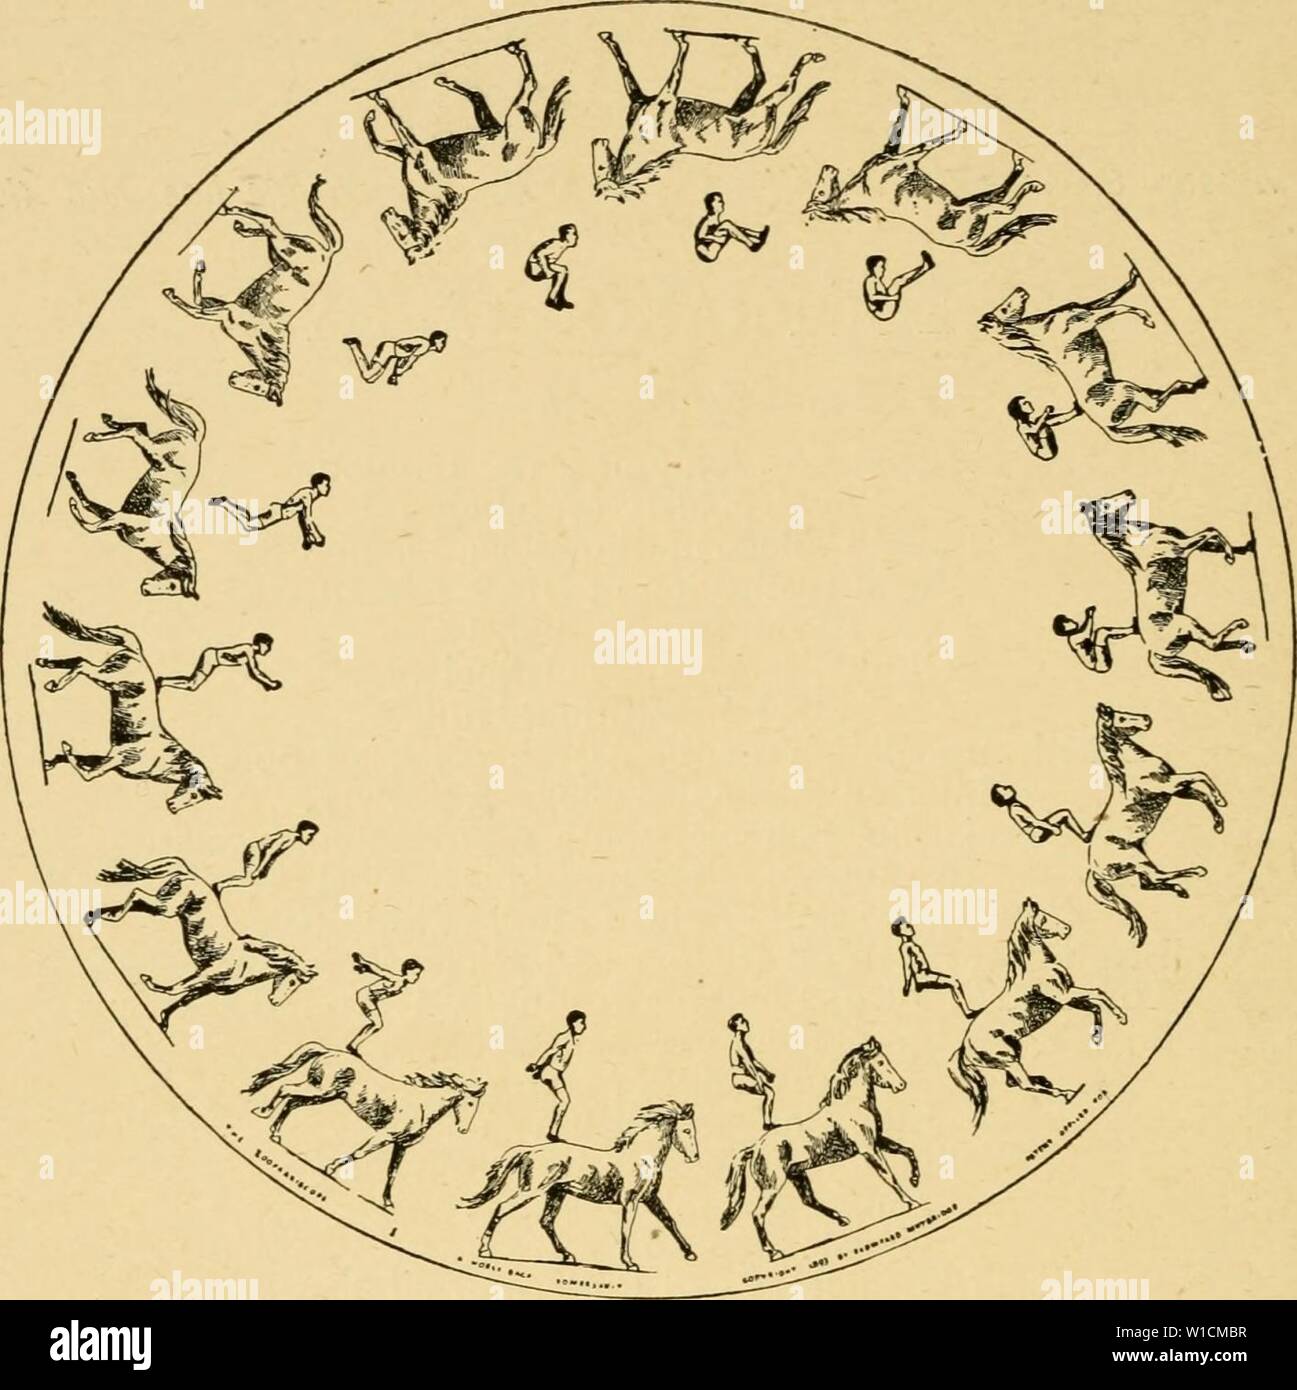 Archive image from page 69 of Descriptive zoopraxography, or, The science. Descriptive zoopraxography, or, The science of animal locomotion made popular . descriptivezoopr00muyb Year: 1893  THE ZOOPRAXISGOPE    1 Athlete, Horse-back Somersault. ABBREVIATED CRITICISMS. 'On Monday last, in the theatre of the Royal Insti- tution, a select and representative audience assembled to witness a series of the most interesting demonstrations of Animal Locomotion given by Mr. Miiybridge. 'The Prince and Princess of Wales, Princess Victo- ria, Louise, and Maud, and the Duke of Pdinburgh hon- ored the occas Stock Photo